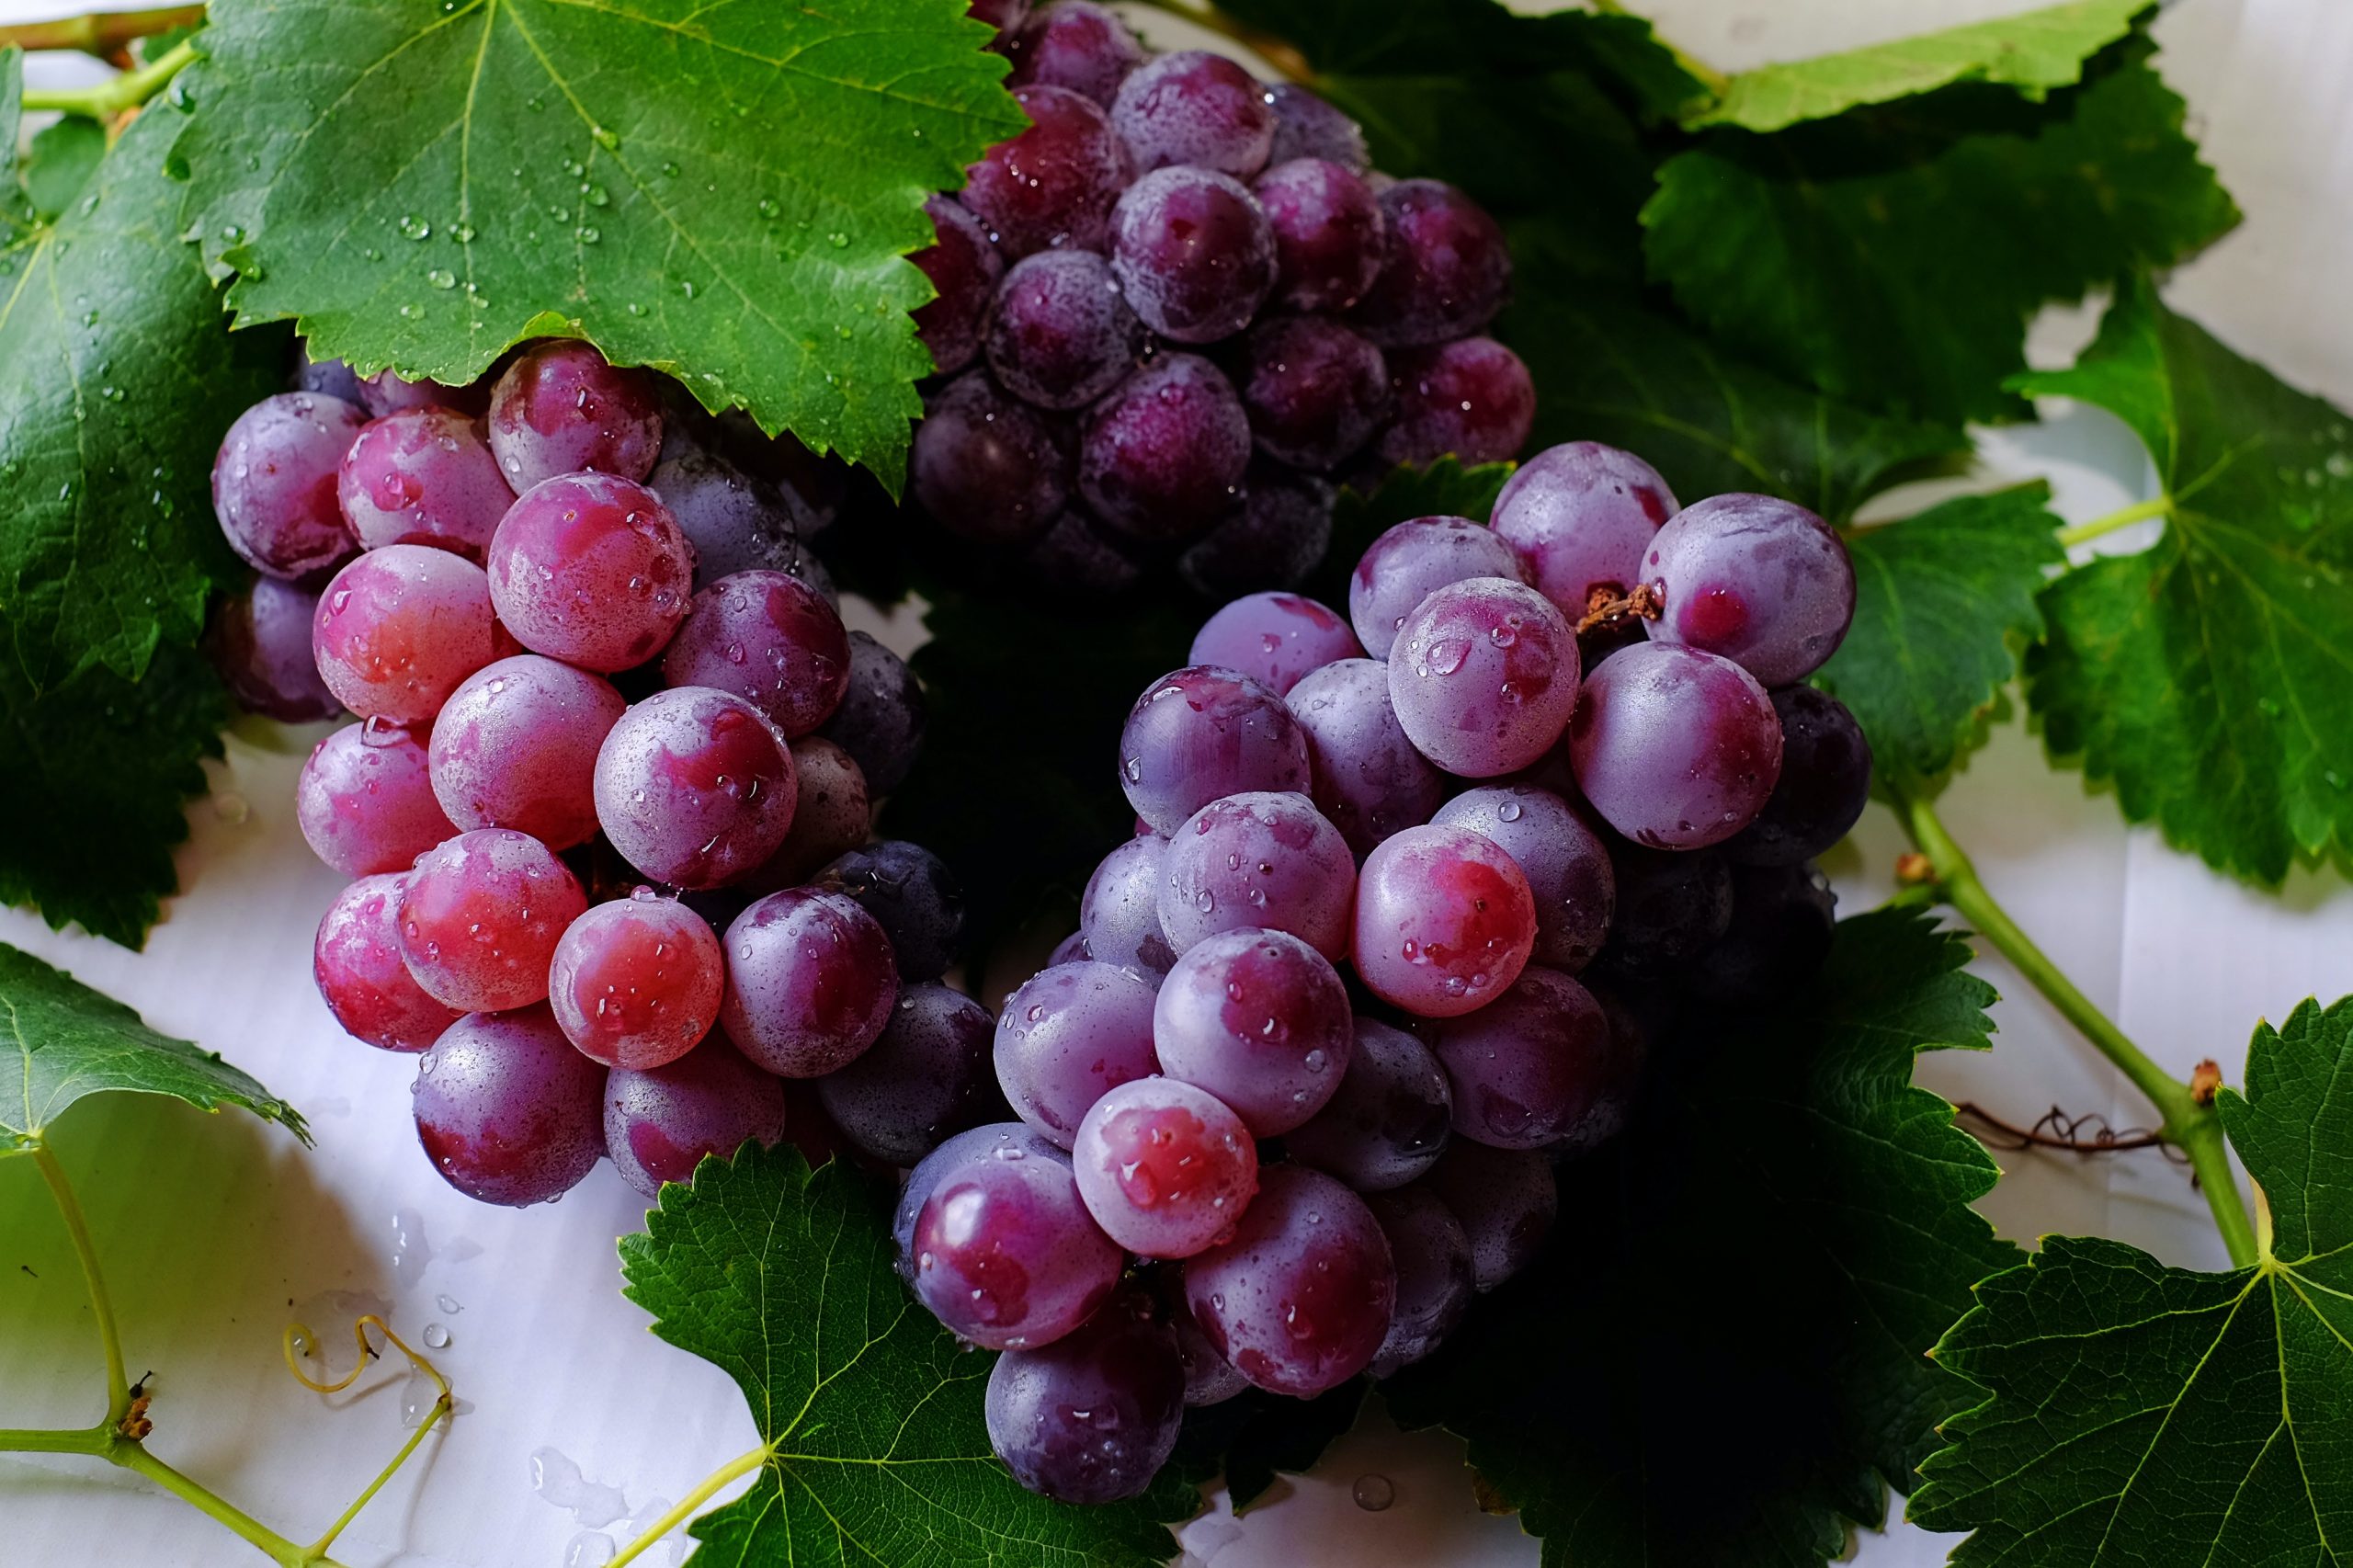 Grapes for beauty. We tell you how you can use them to make your own beauty products